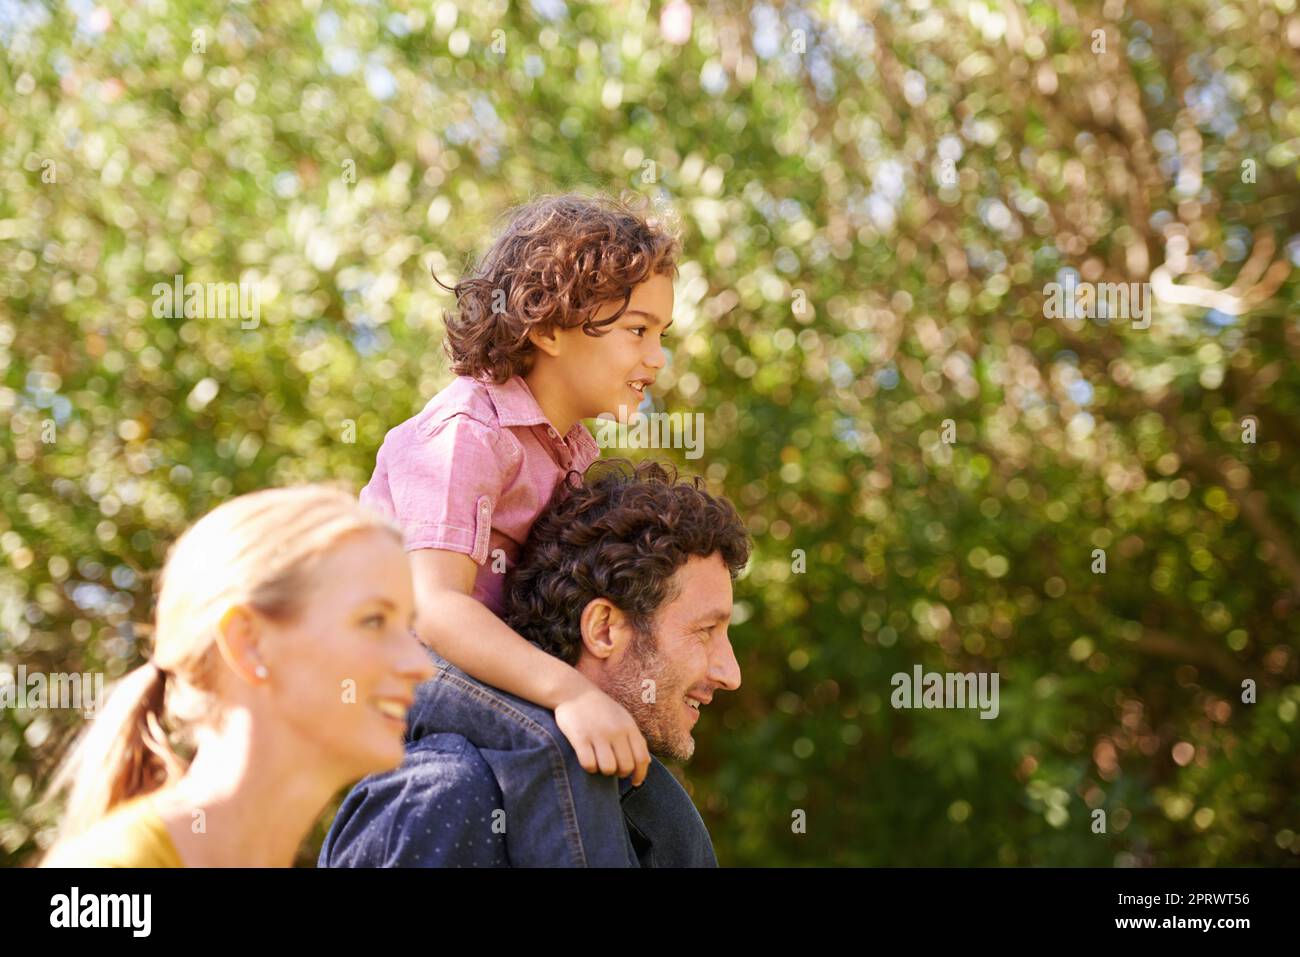 Lets spend a day in nature. a young one child family outdoors in nature. Stock Photo